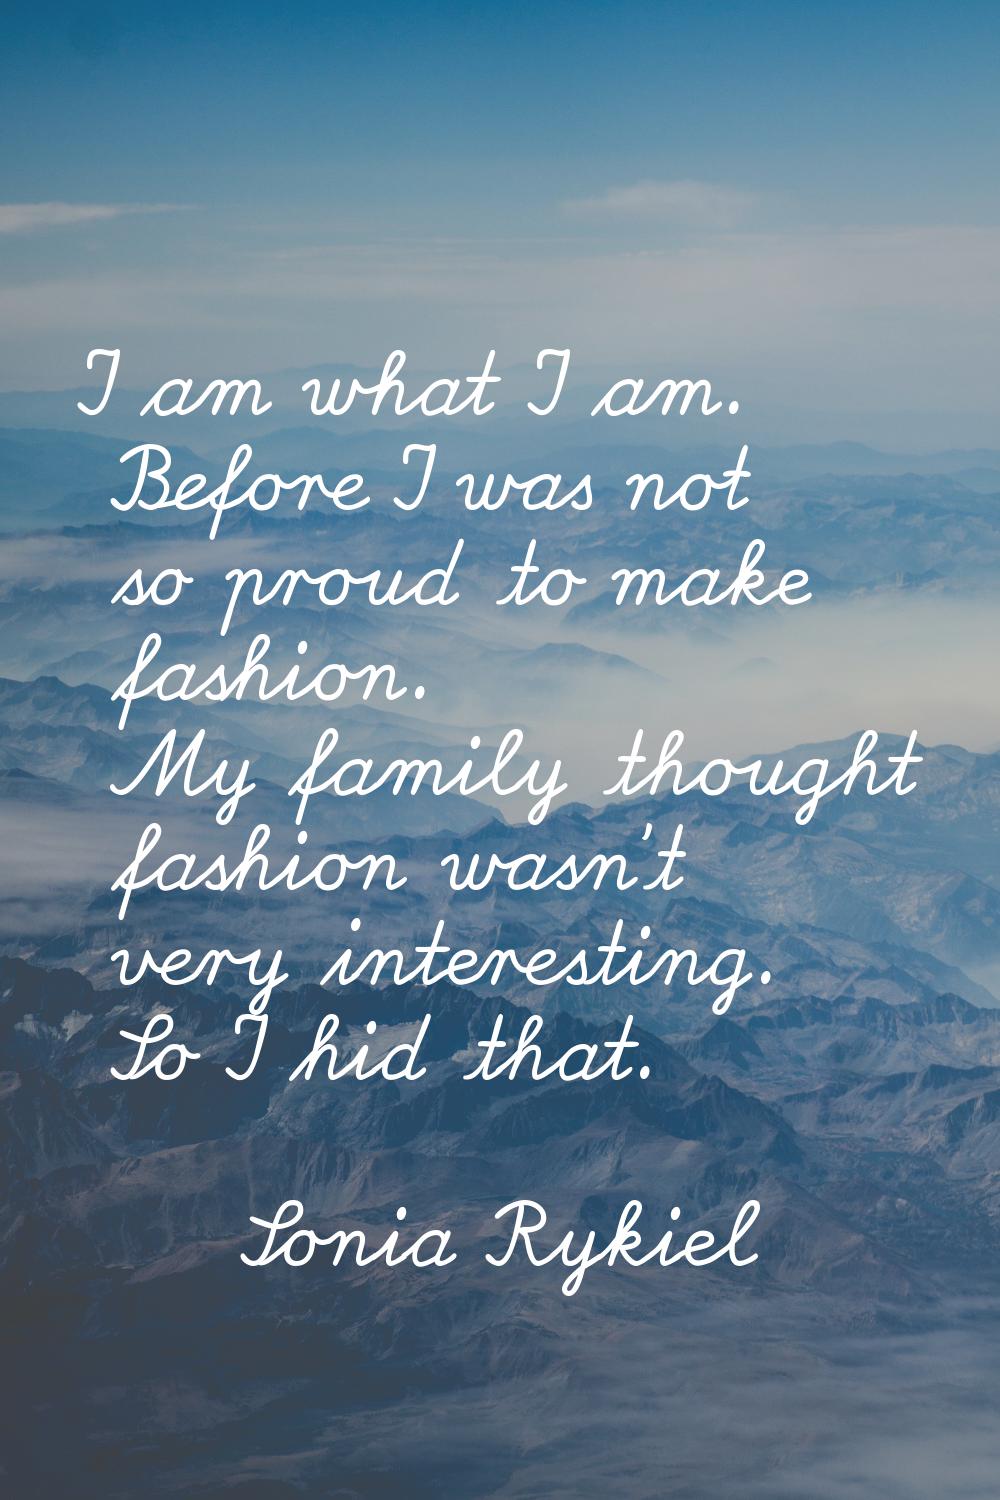 I am what I am. Before I was not so proud to make fashion. My family thought fashion wasn't very in